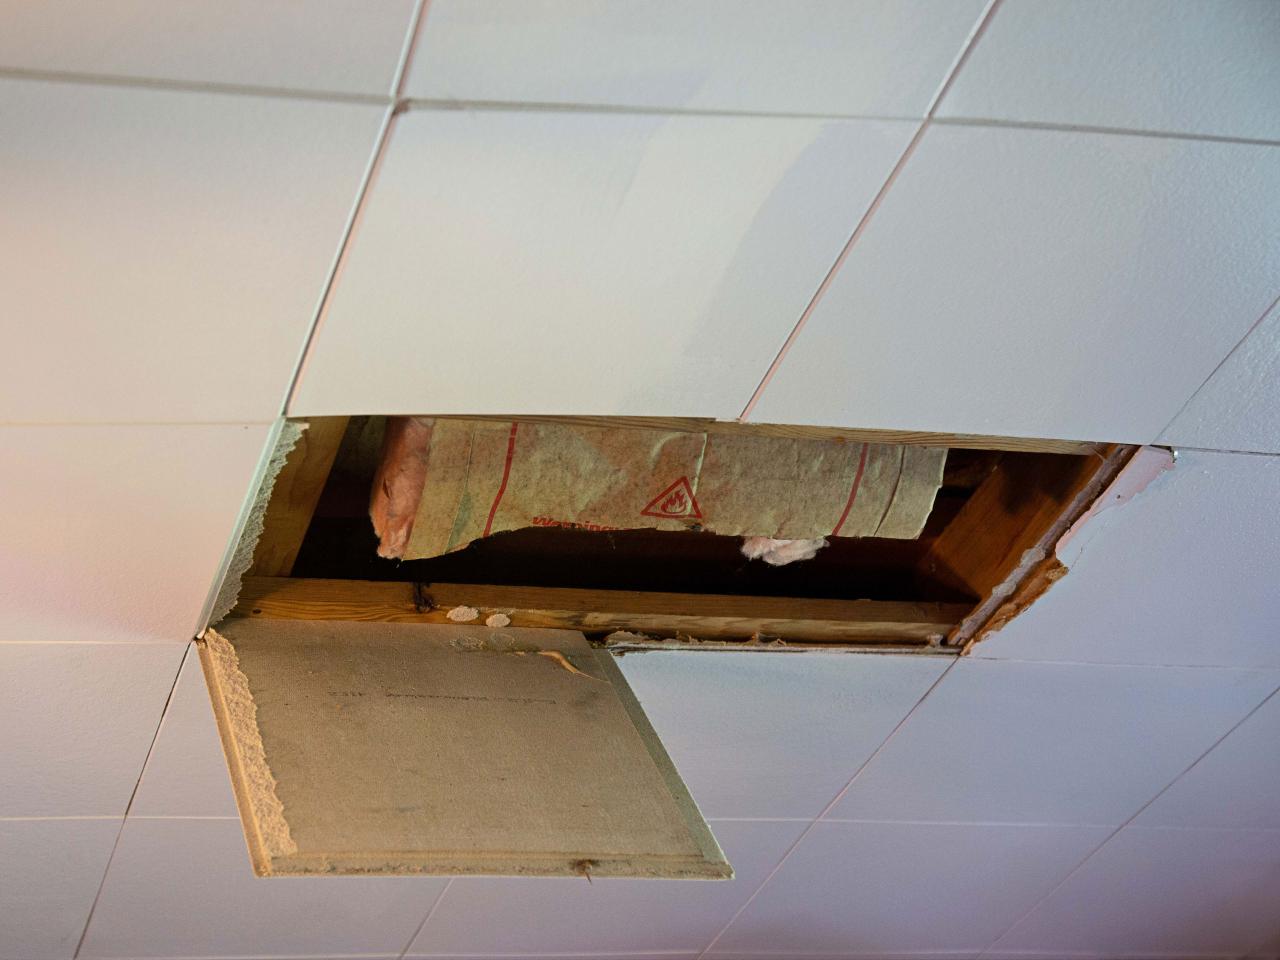 How To Replace A Drop Ceiling With Beadboard Paneling - How To Replace Ceiling Tiles In Basement